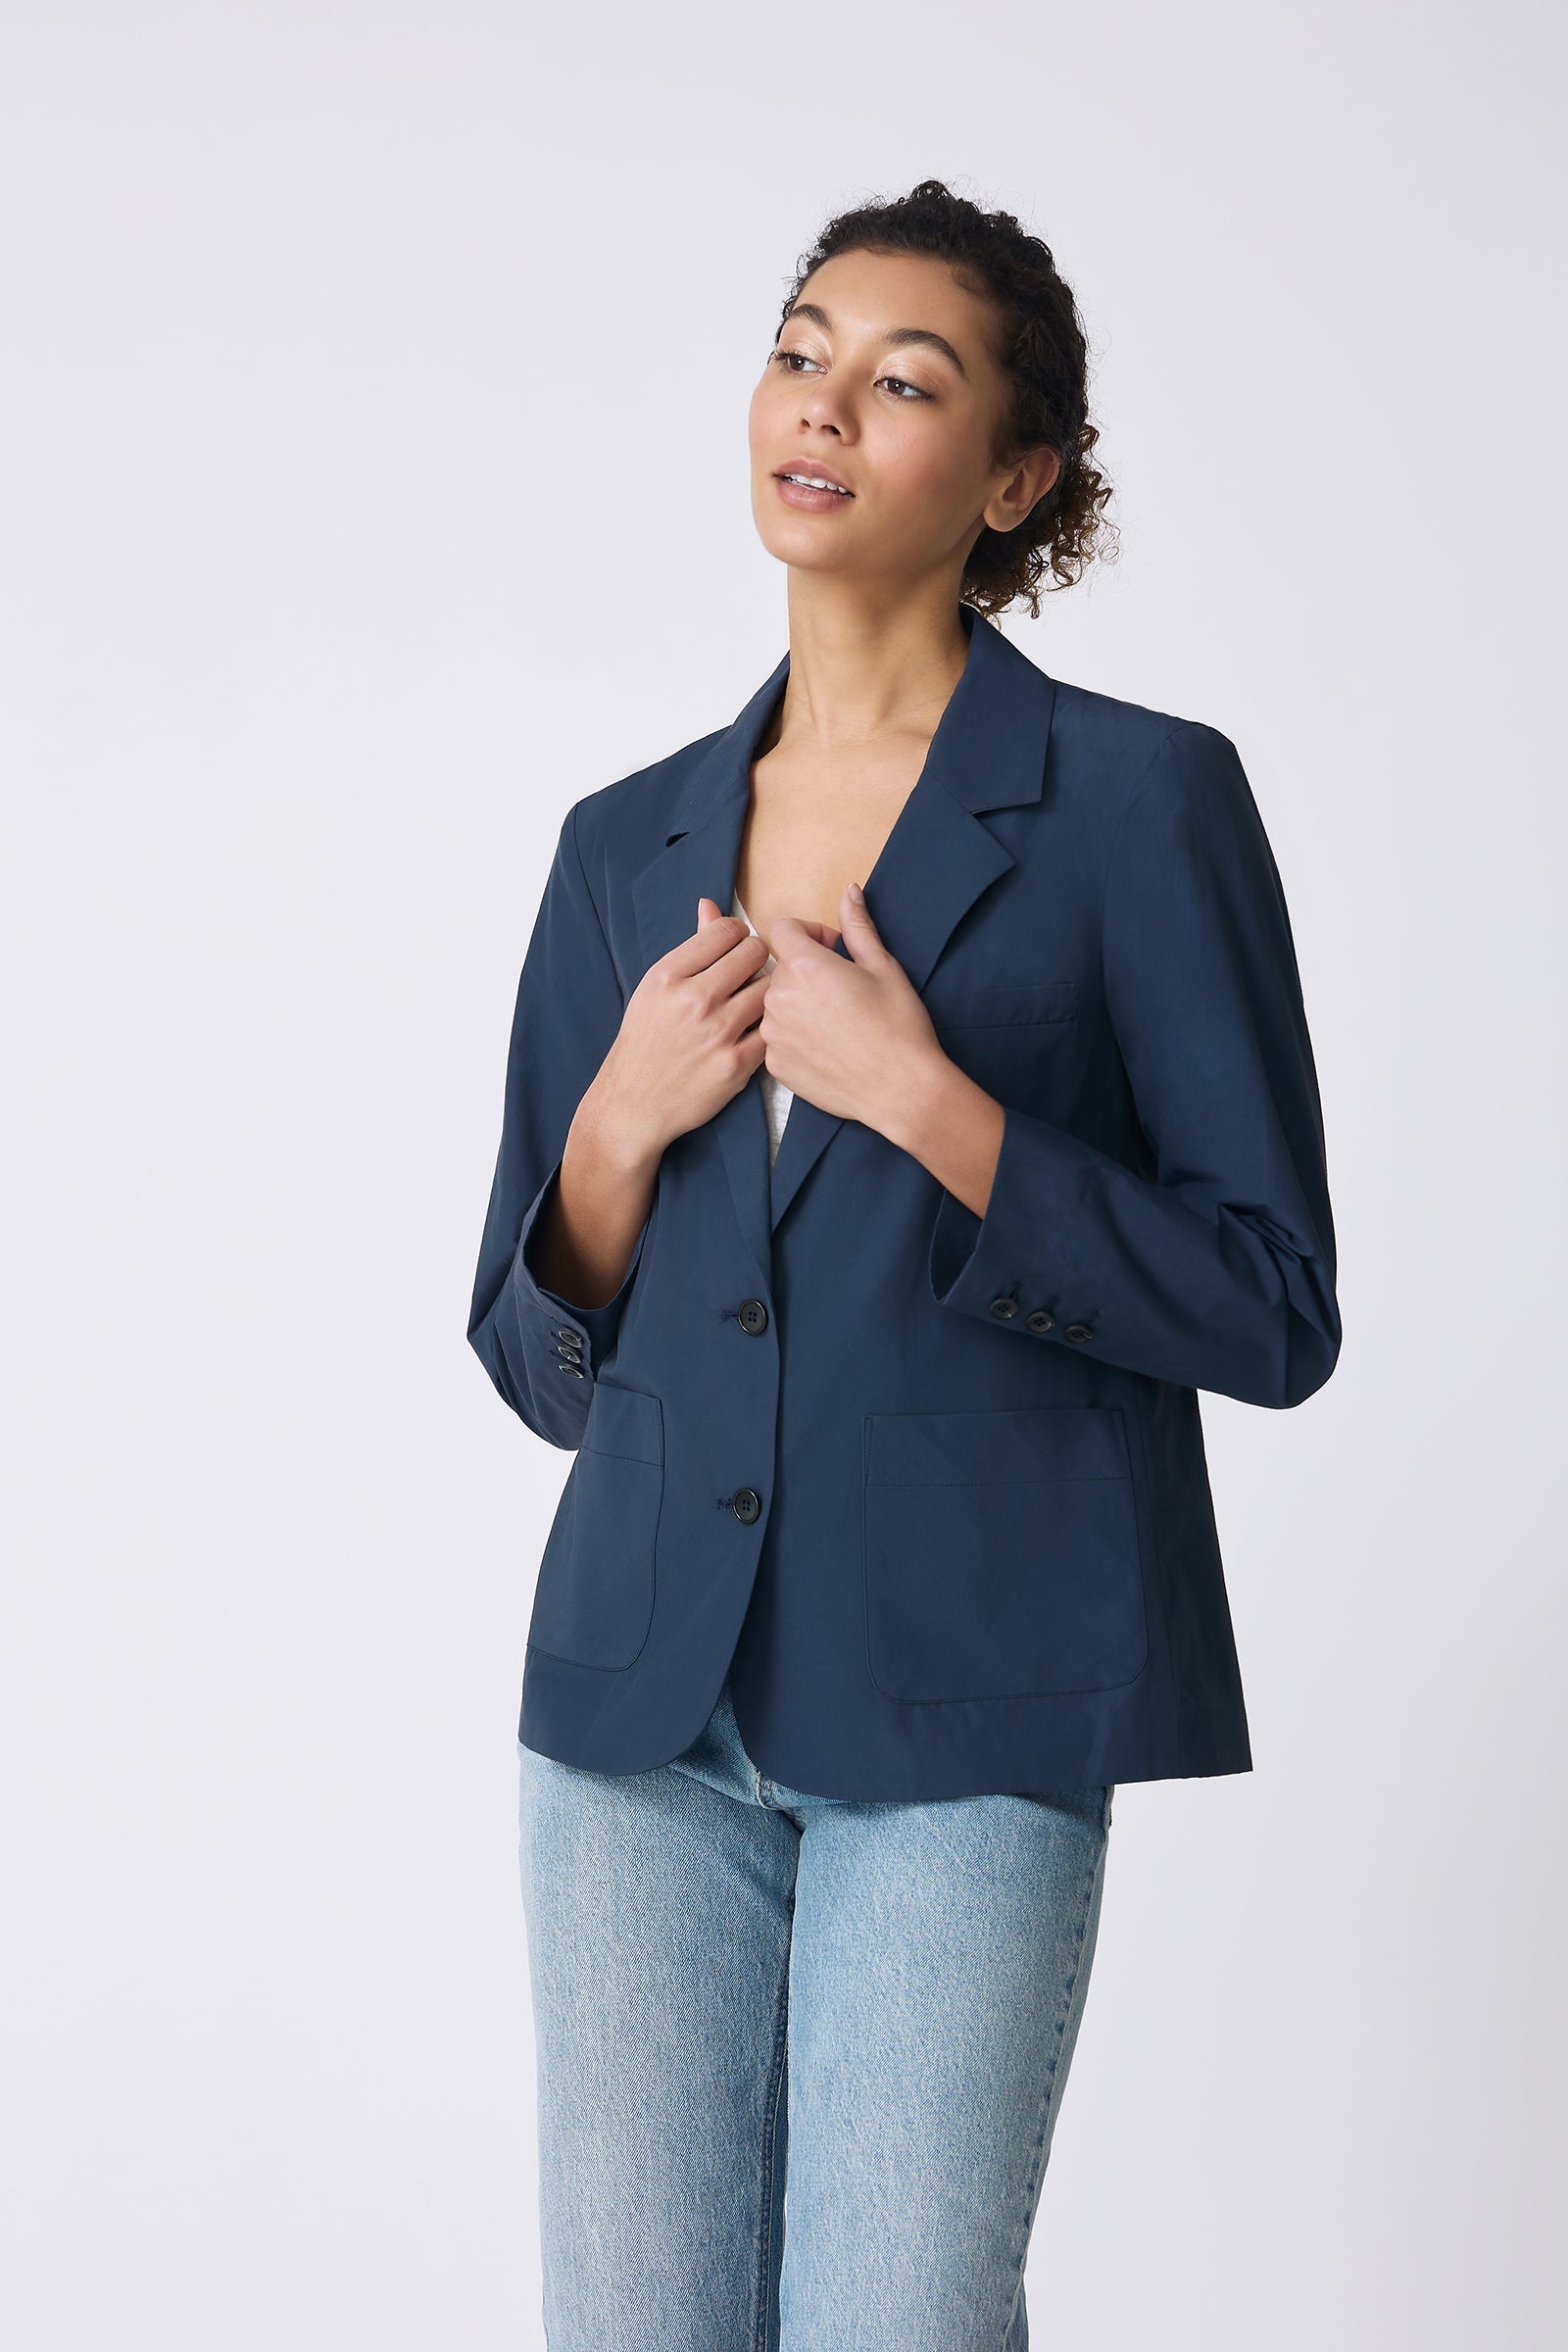 Kal Rieman Castel Patch Pocket Blazer in Summer Navy on model looking right front view